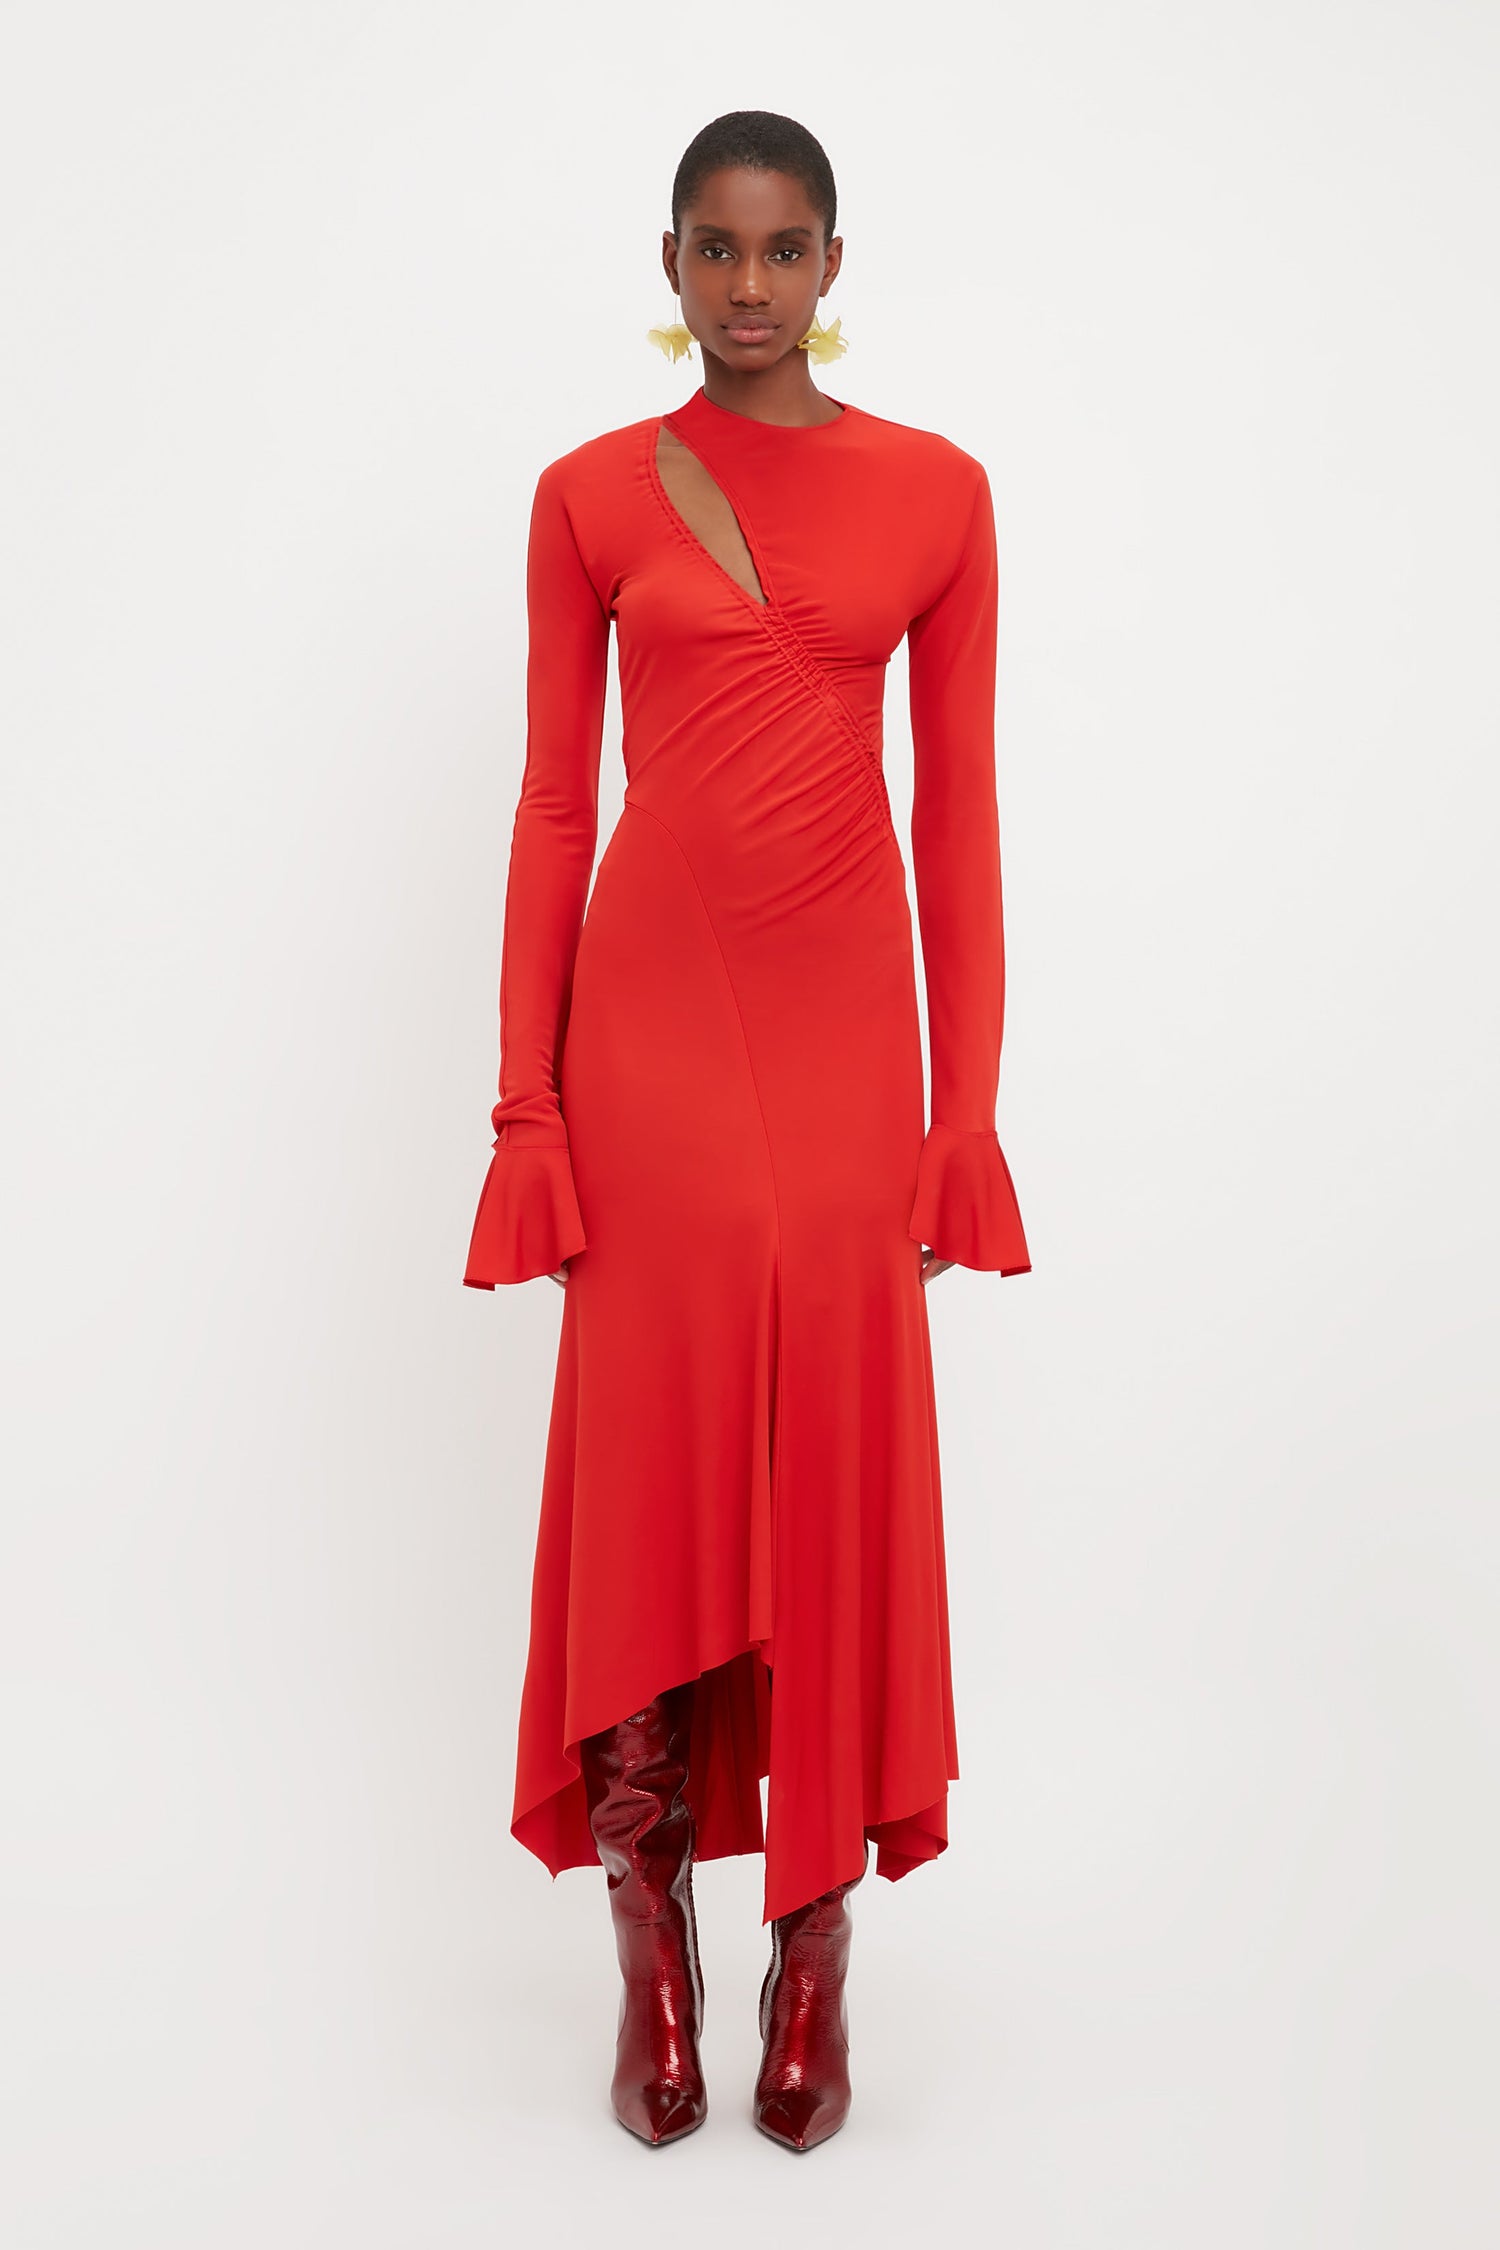 Model wearing a red midi dress from luxury fashion designer Victoria Beckham. This red body con dress is made from jersey and has a slash front detail. With a gathered waist and asymmetric hem and long sleeves.